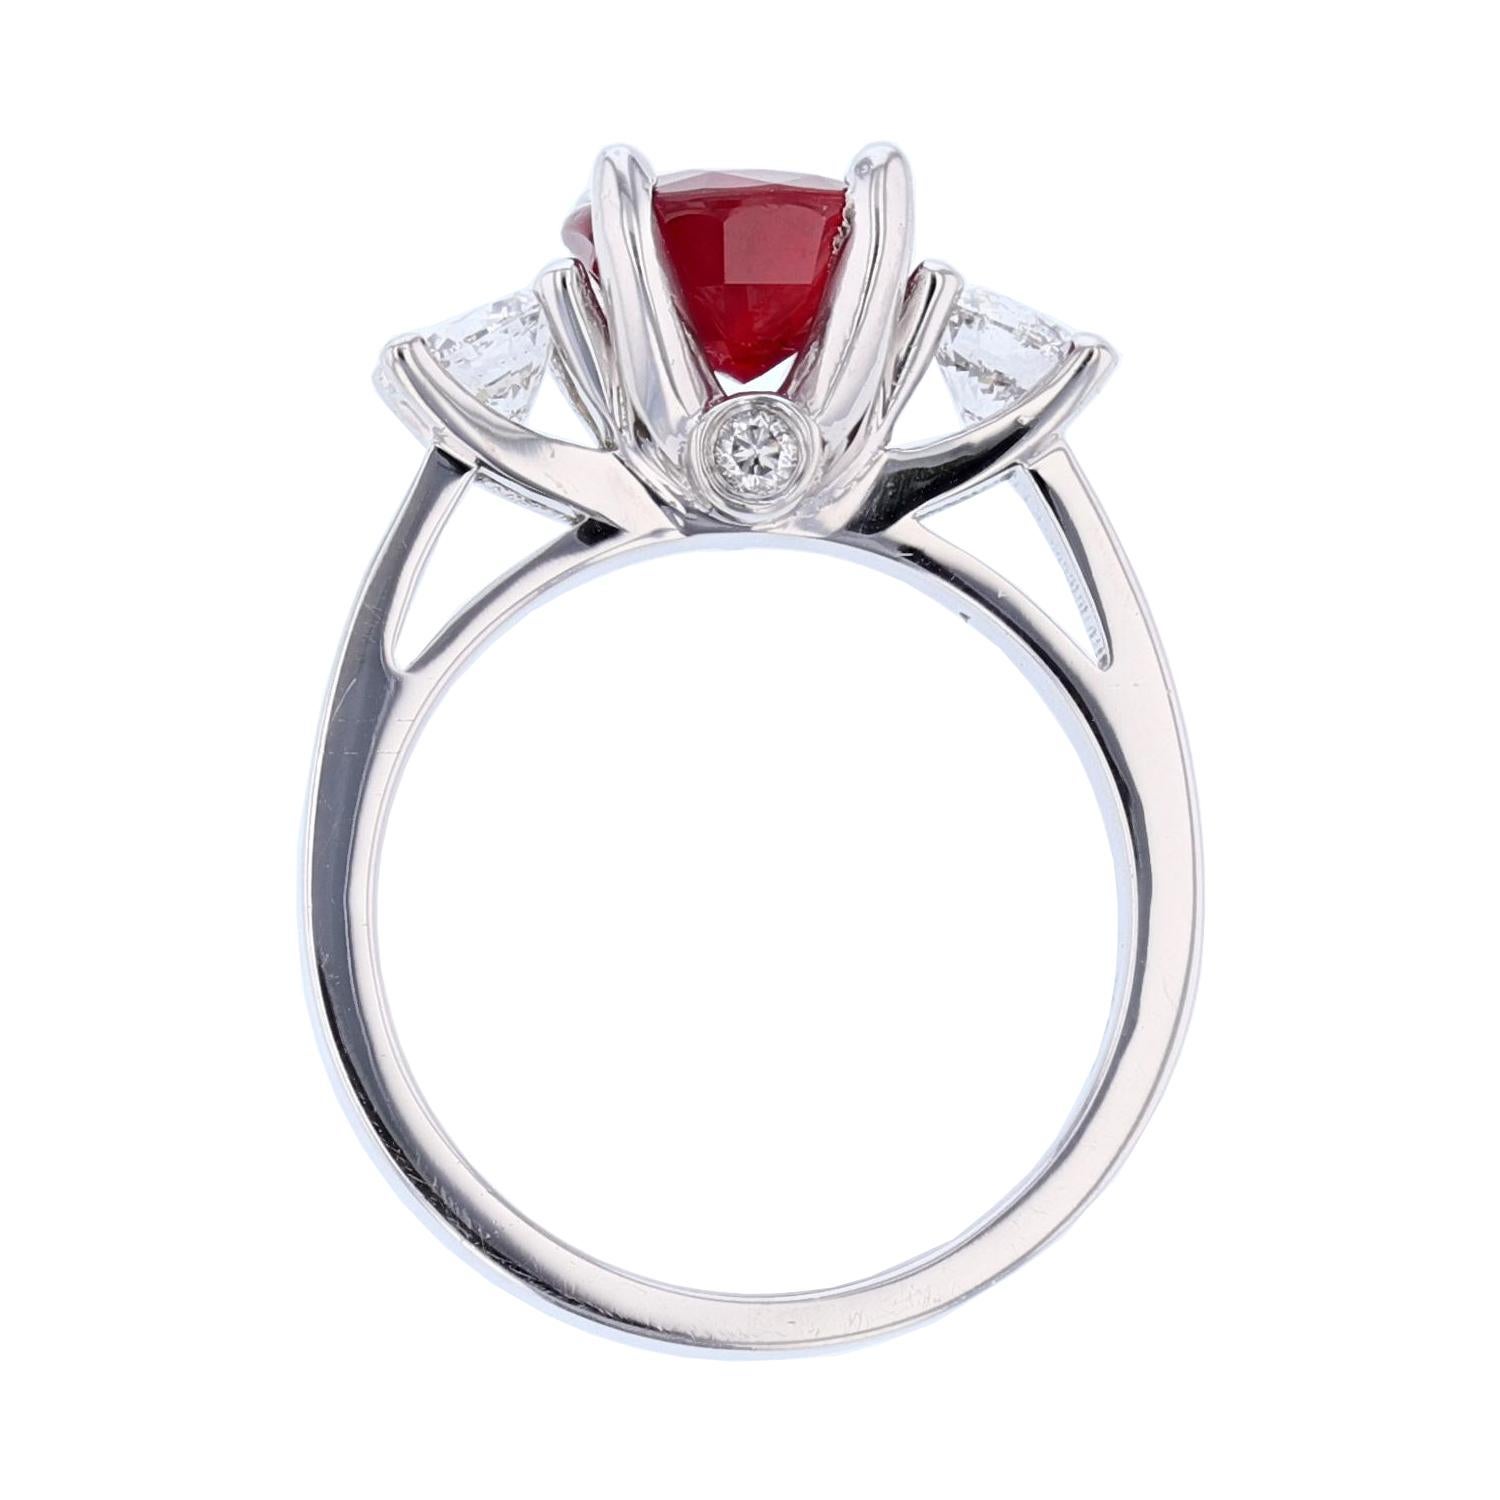 Contemporary 14 Karat Gold 2.73 Carat Certified Oval Cut Ruby and Diamond Ring